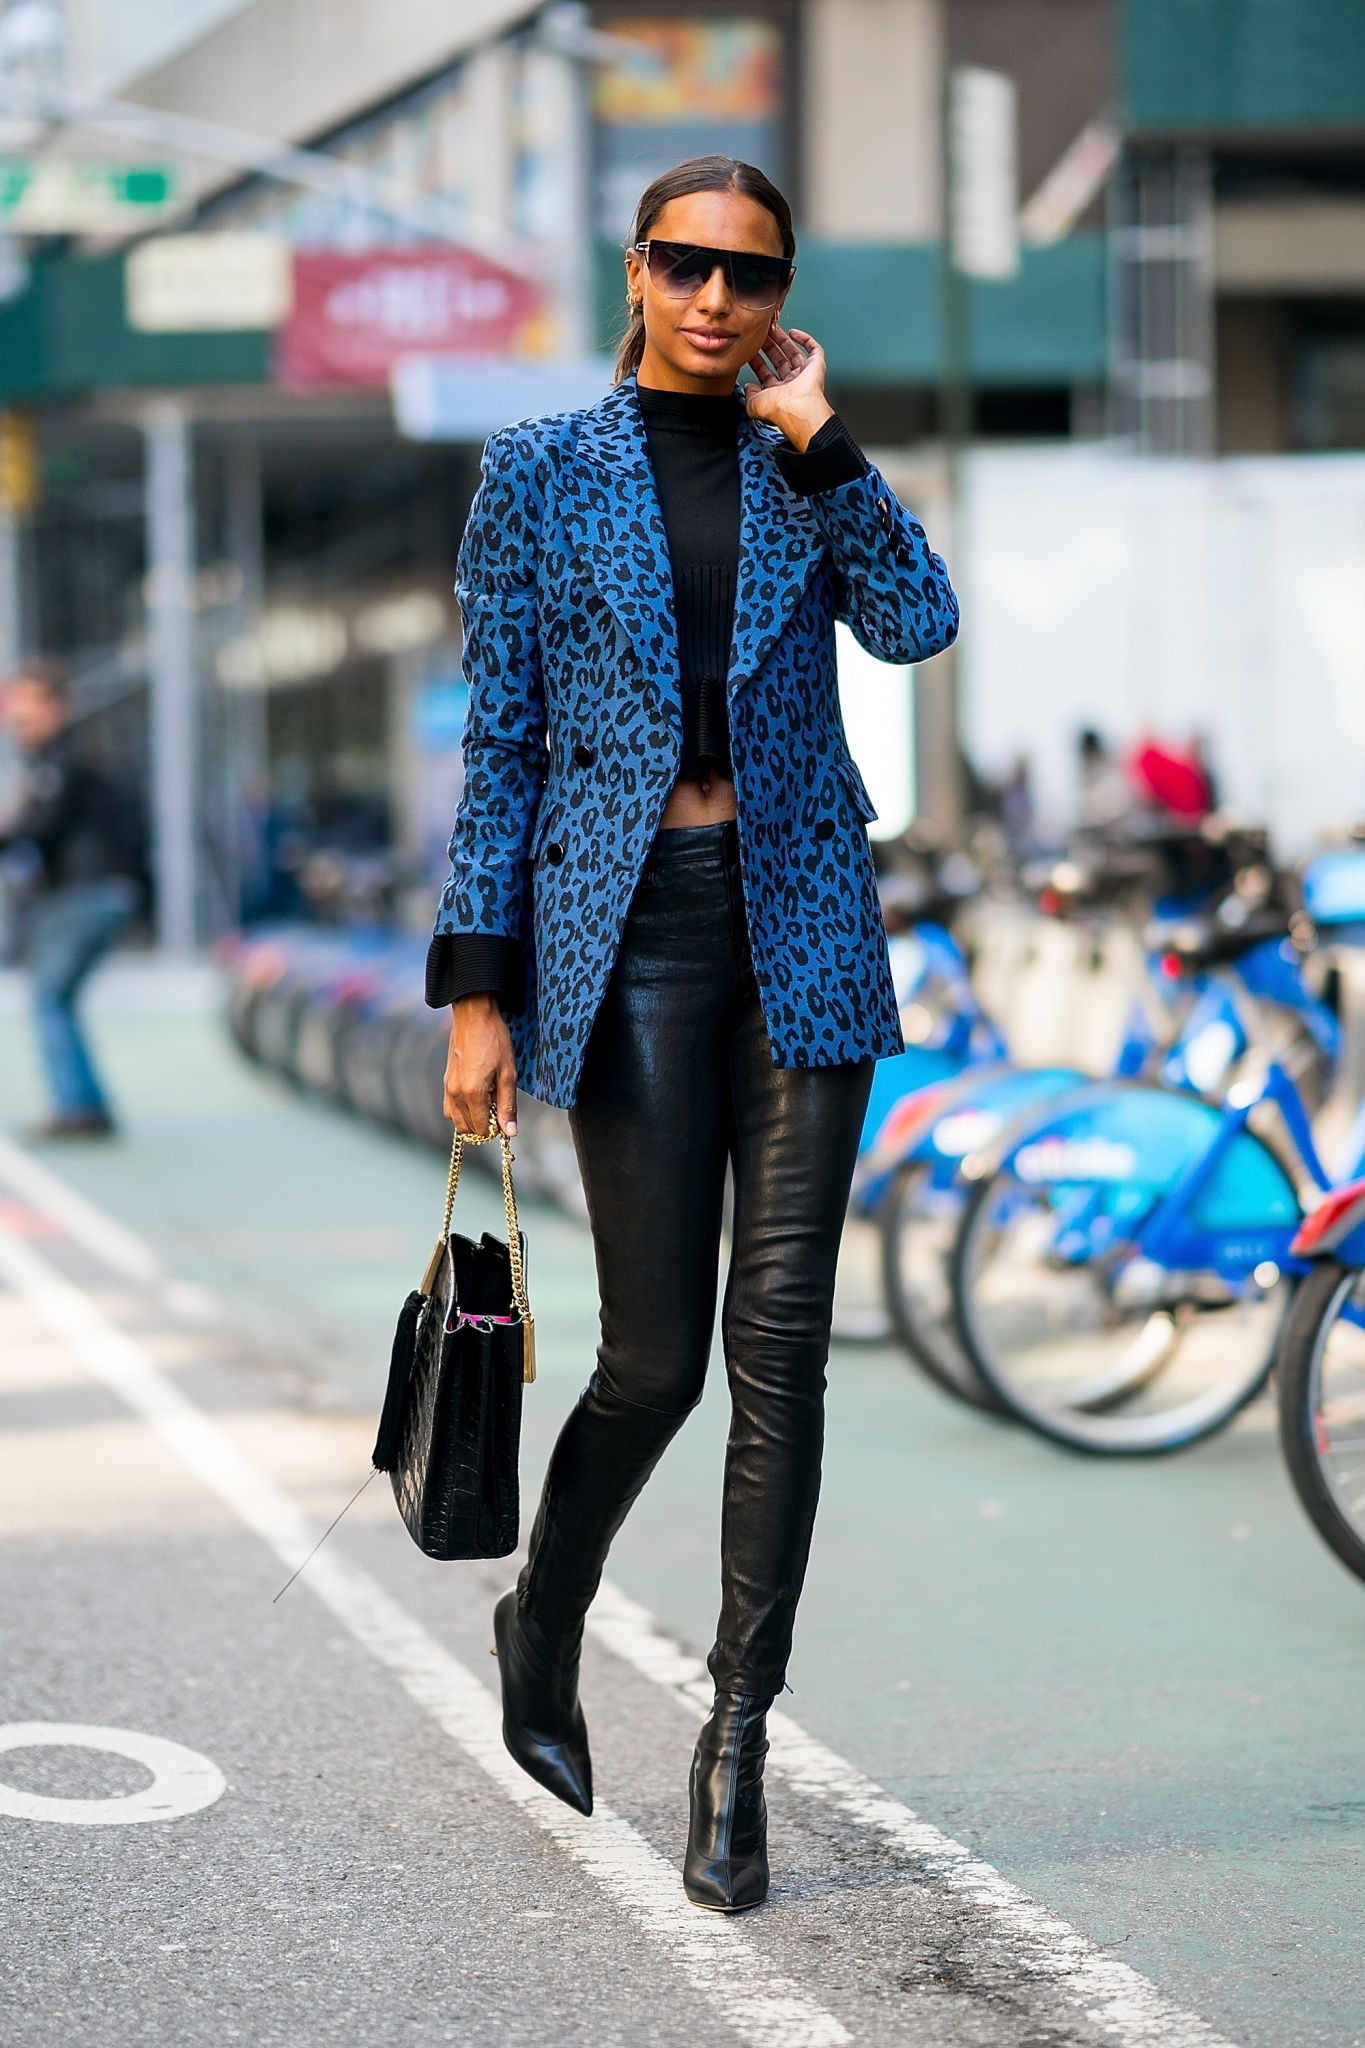 Jasmine Tookes arriving at the Victoria’s Secret offices